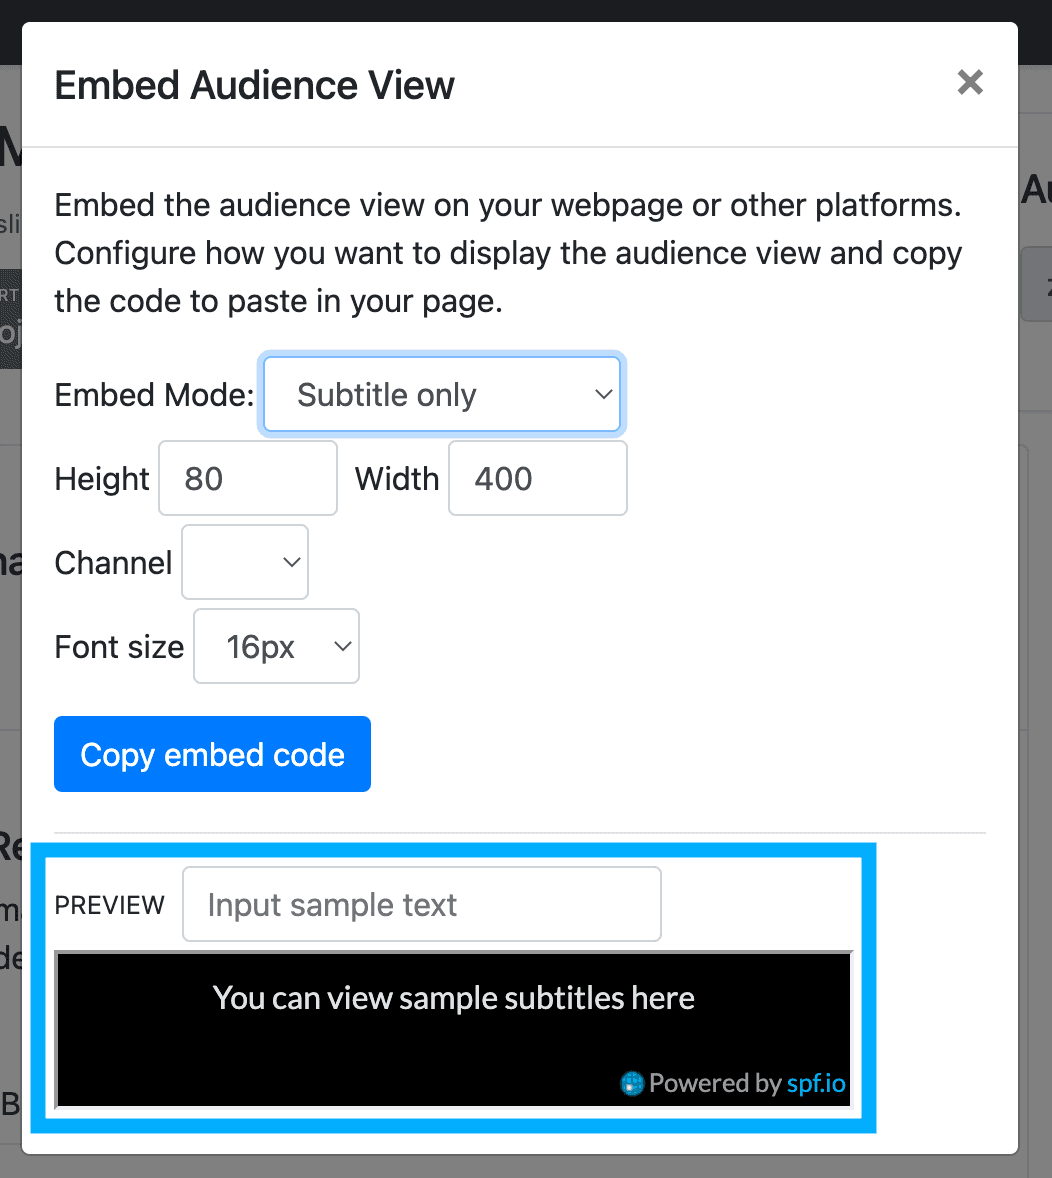 A screenshot of the "embed audience view" configuration modal